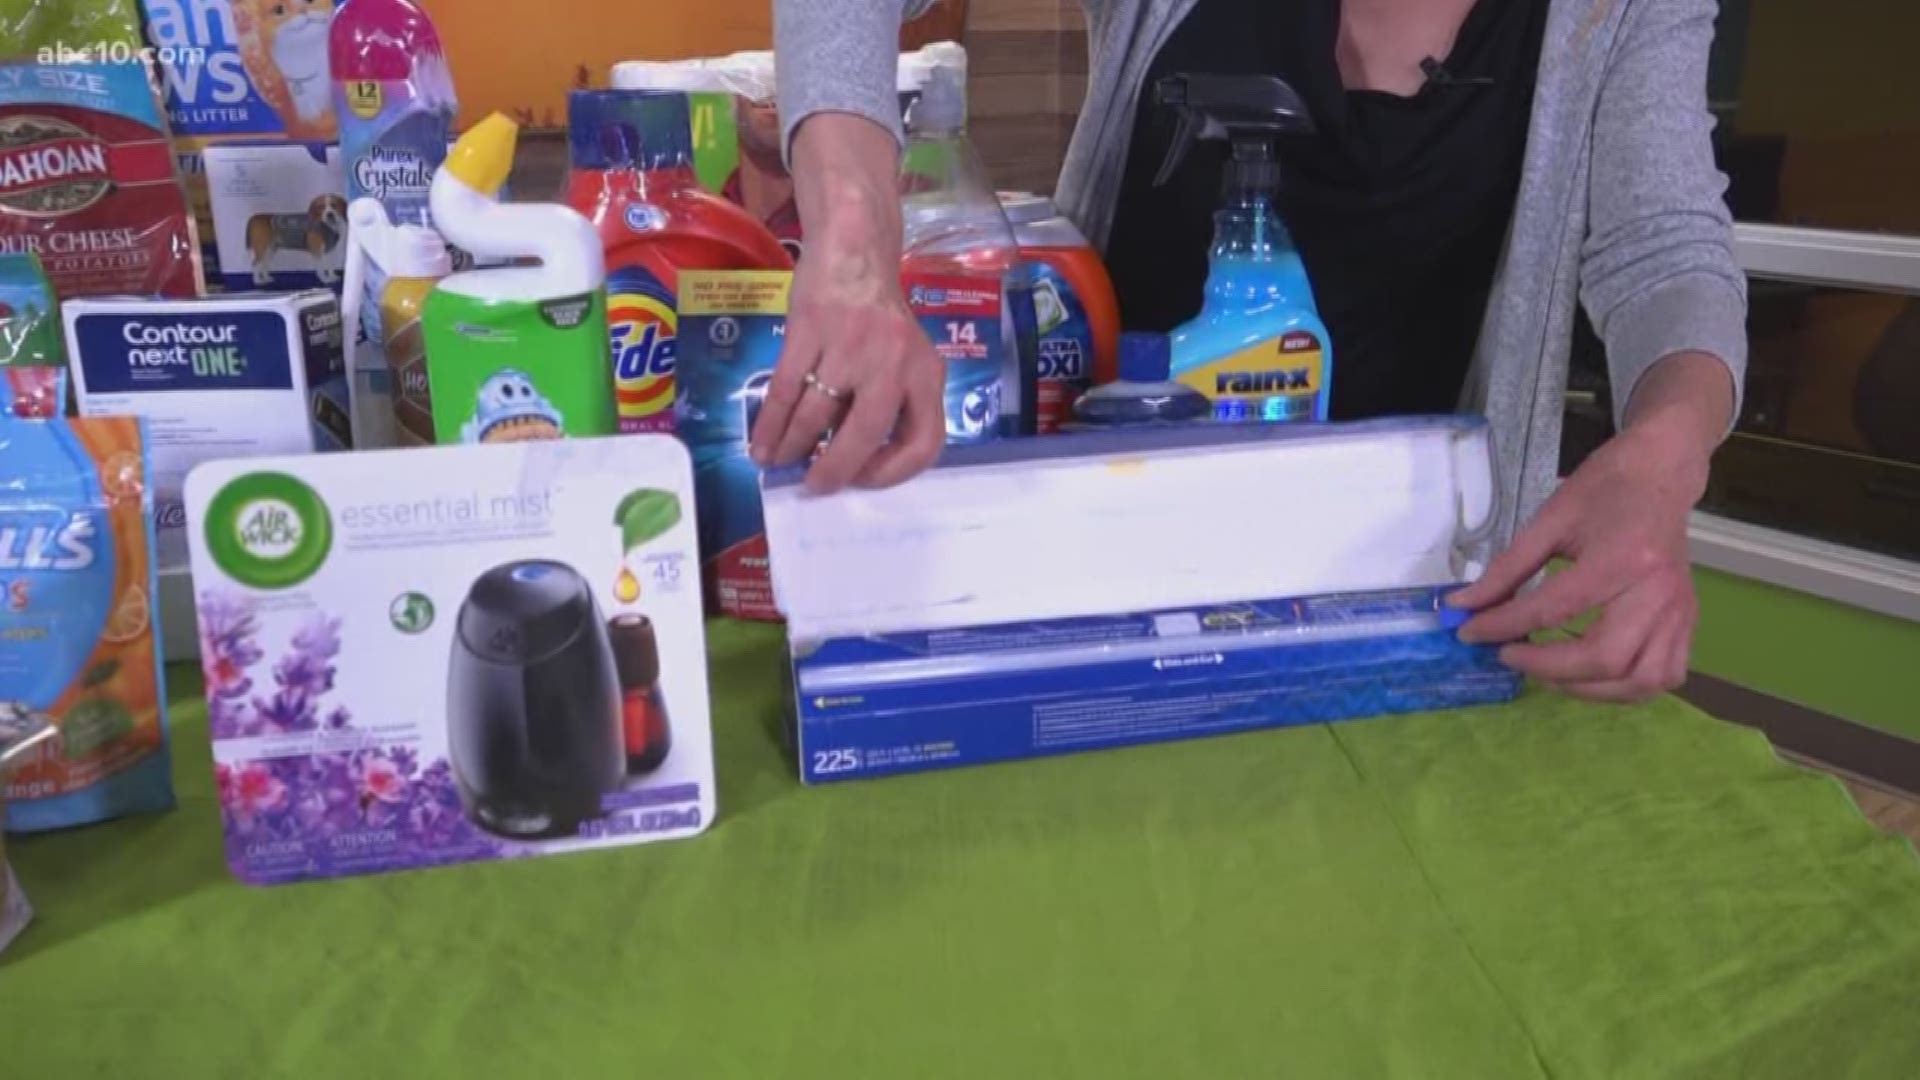 Lifestyle expert Rose Zahnn, founder of Healthy Habits Studio, shows us the 2019 Product of the Year winners that'll help you get a jump start on your spring cleaning.